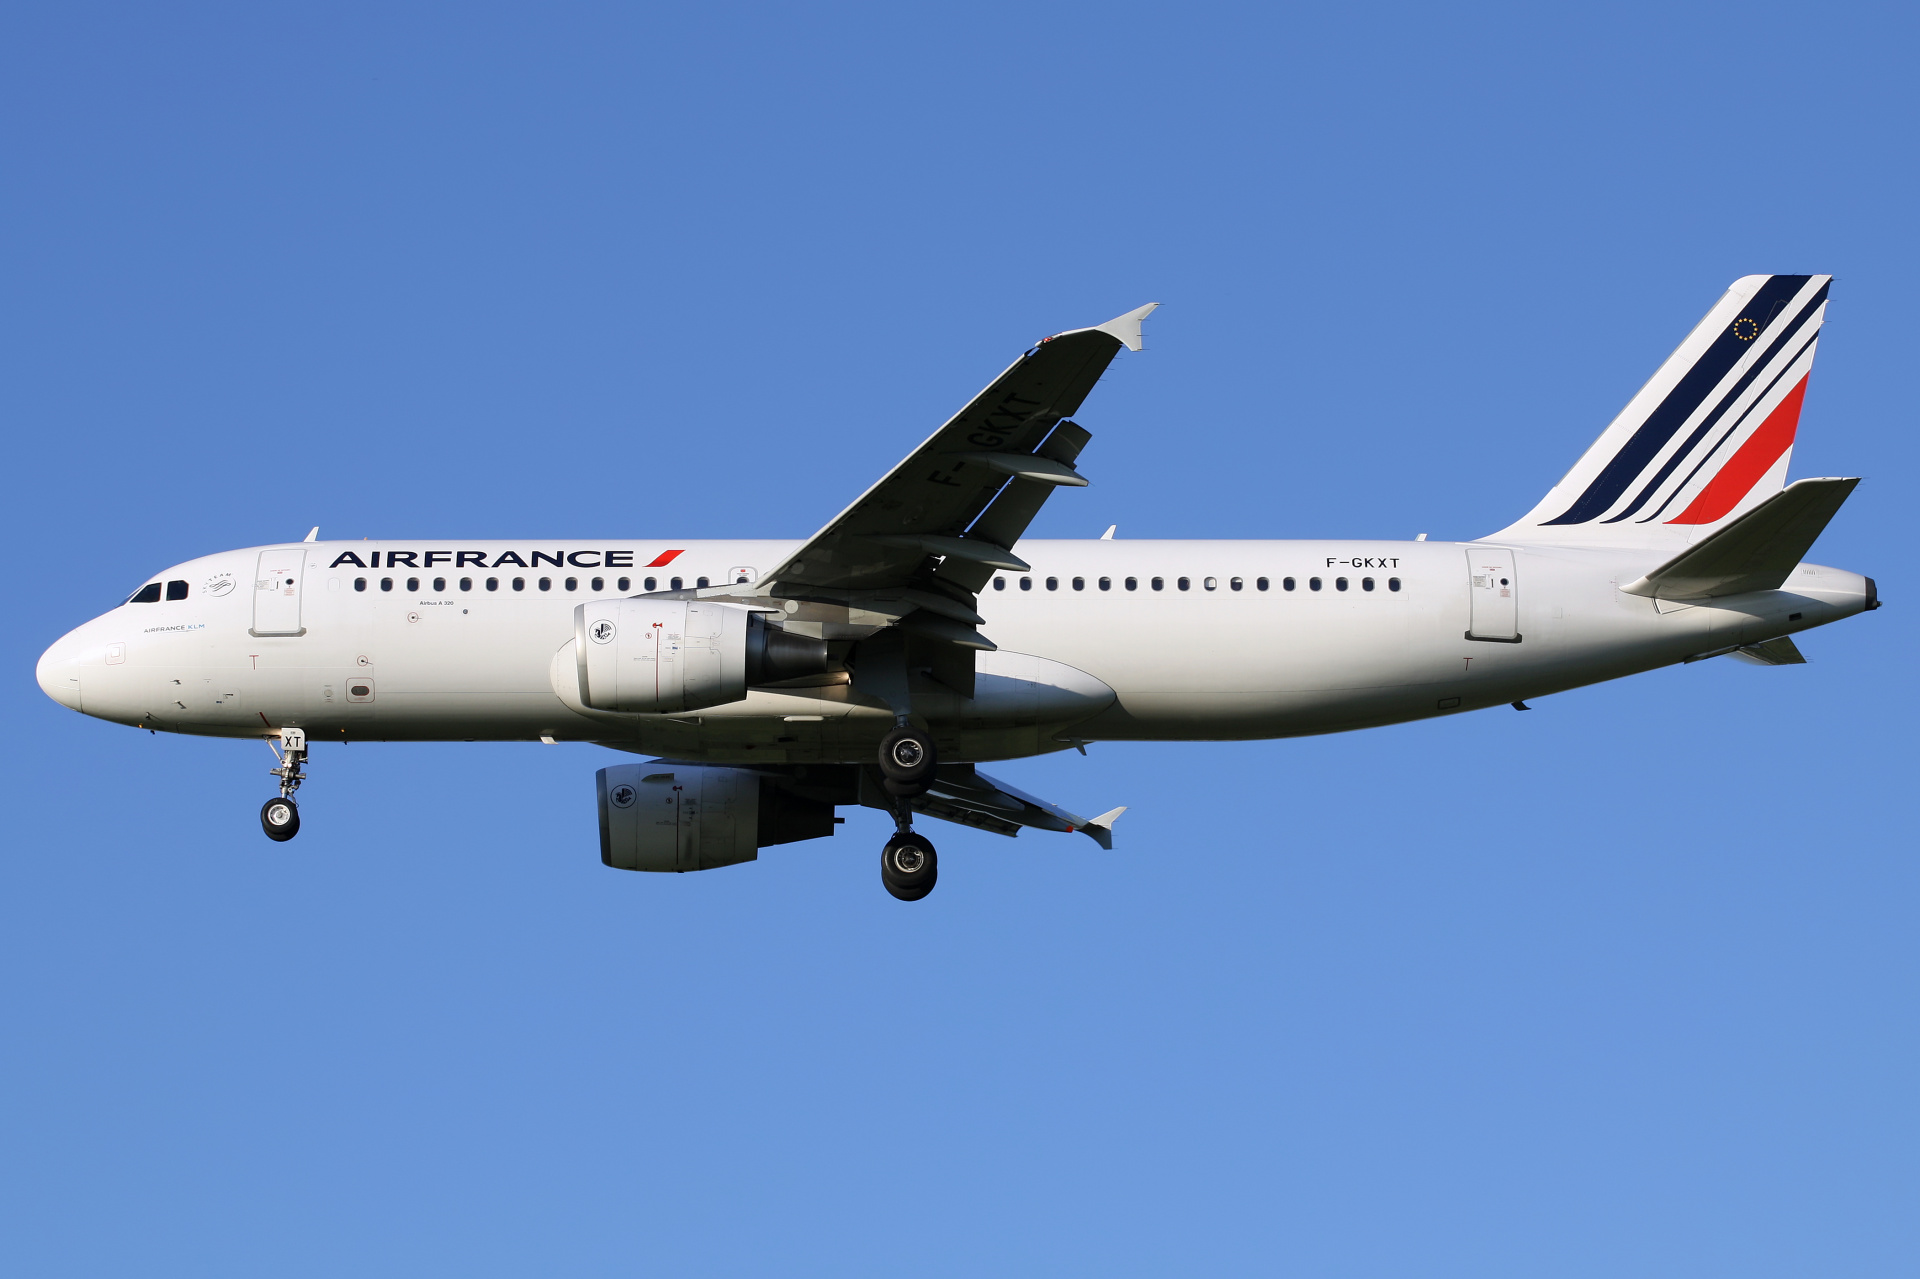 F-GKXT (new livery) (Aircraft » EPWA Spotting » Airbus A320-200 » Air France)